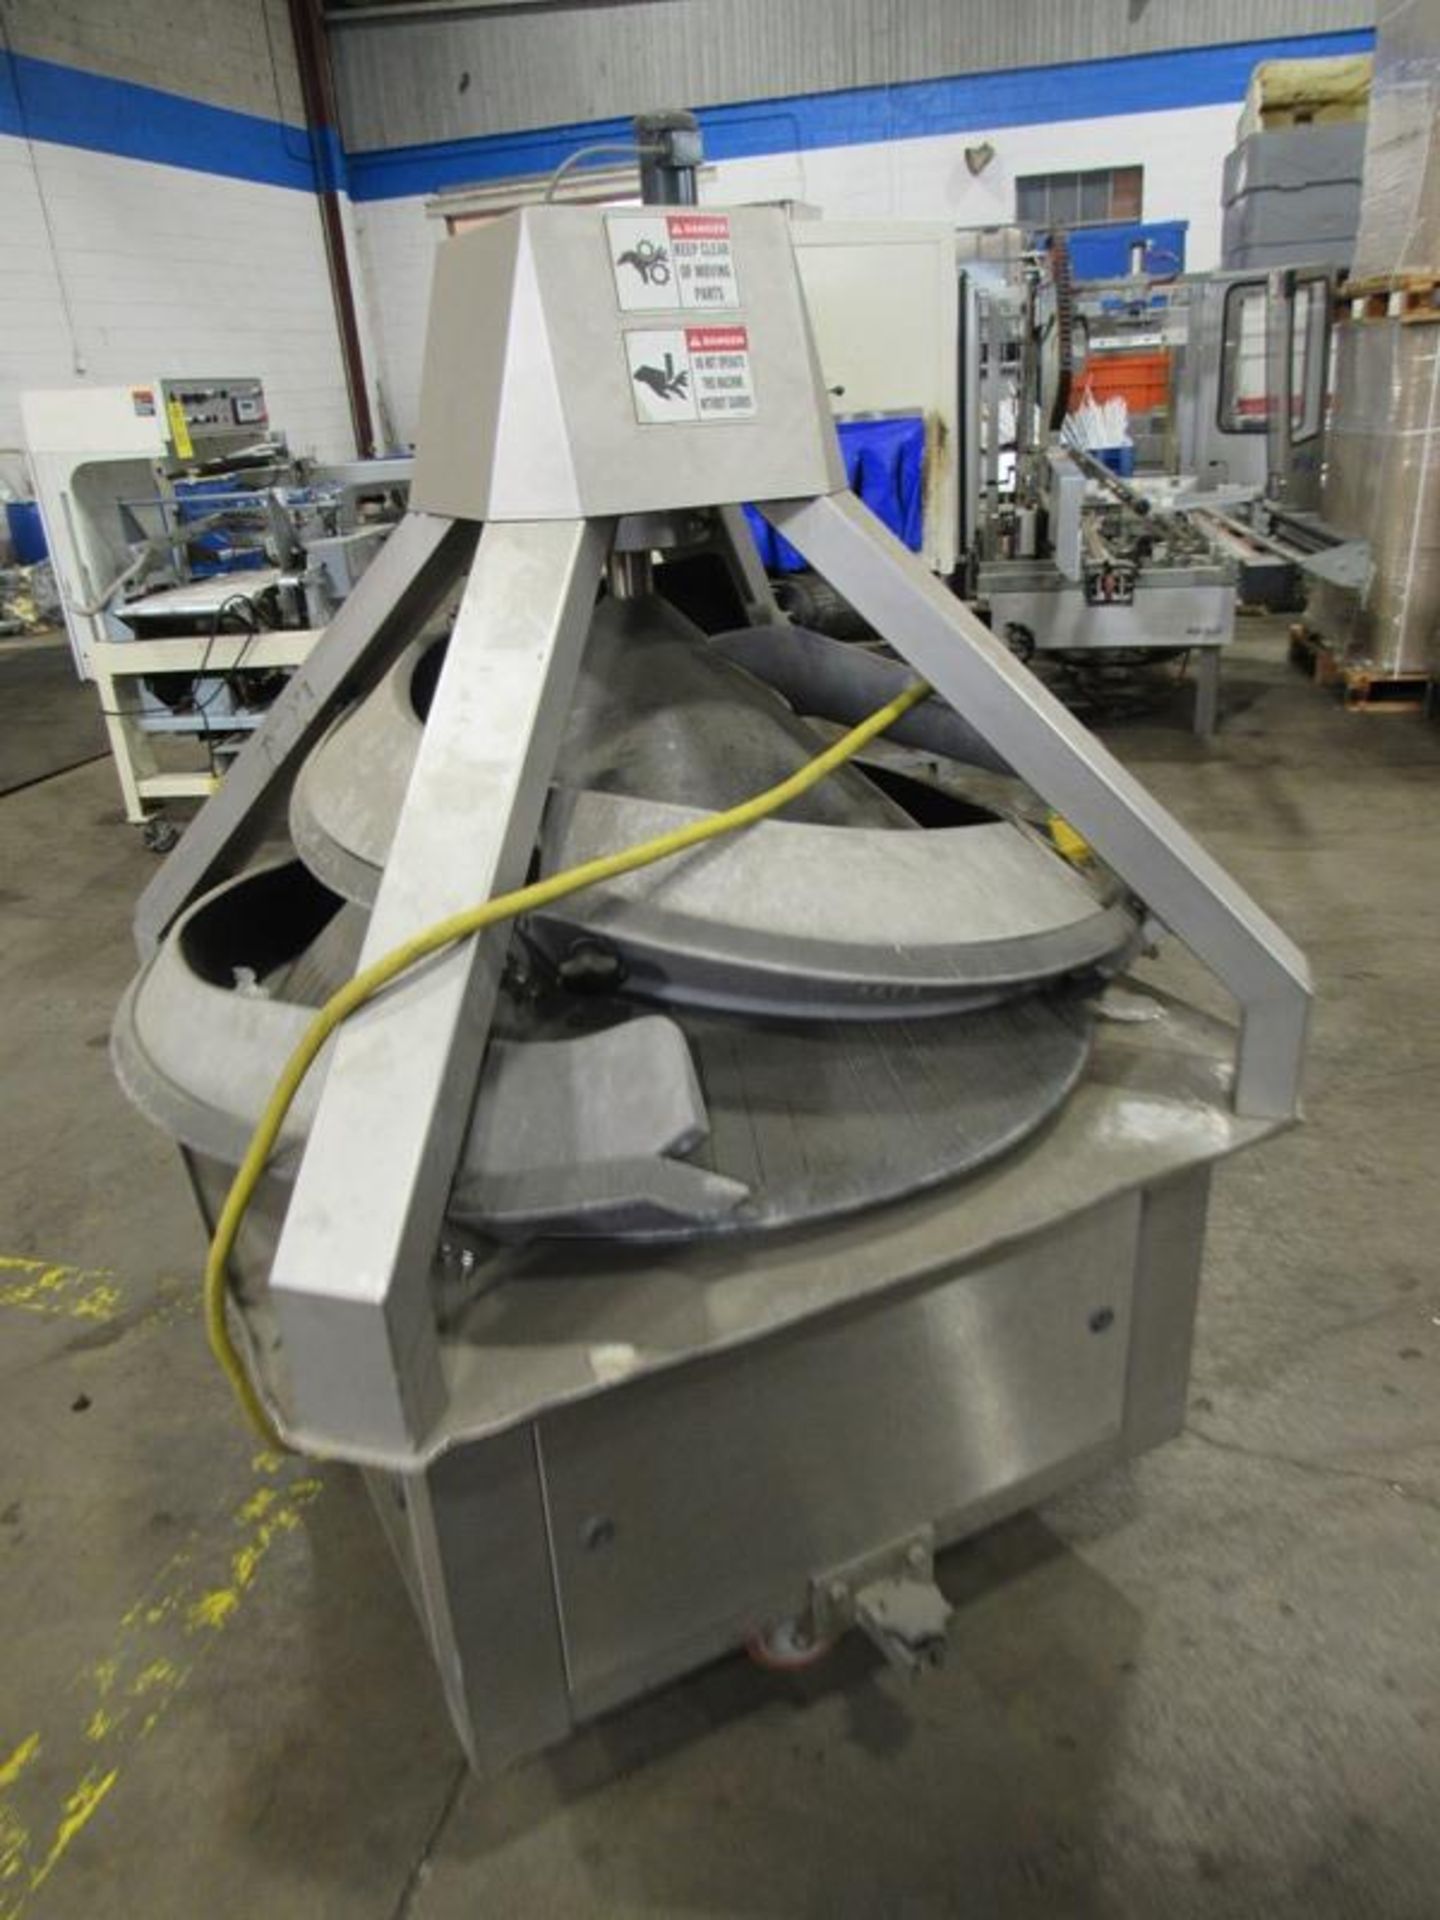 Benier Mdl. 005MTSS Dough Ball Rounder, Ser. #7.1820, 208/230 volts, 3 phase on wheels, Located in - Image 2 of 3